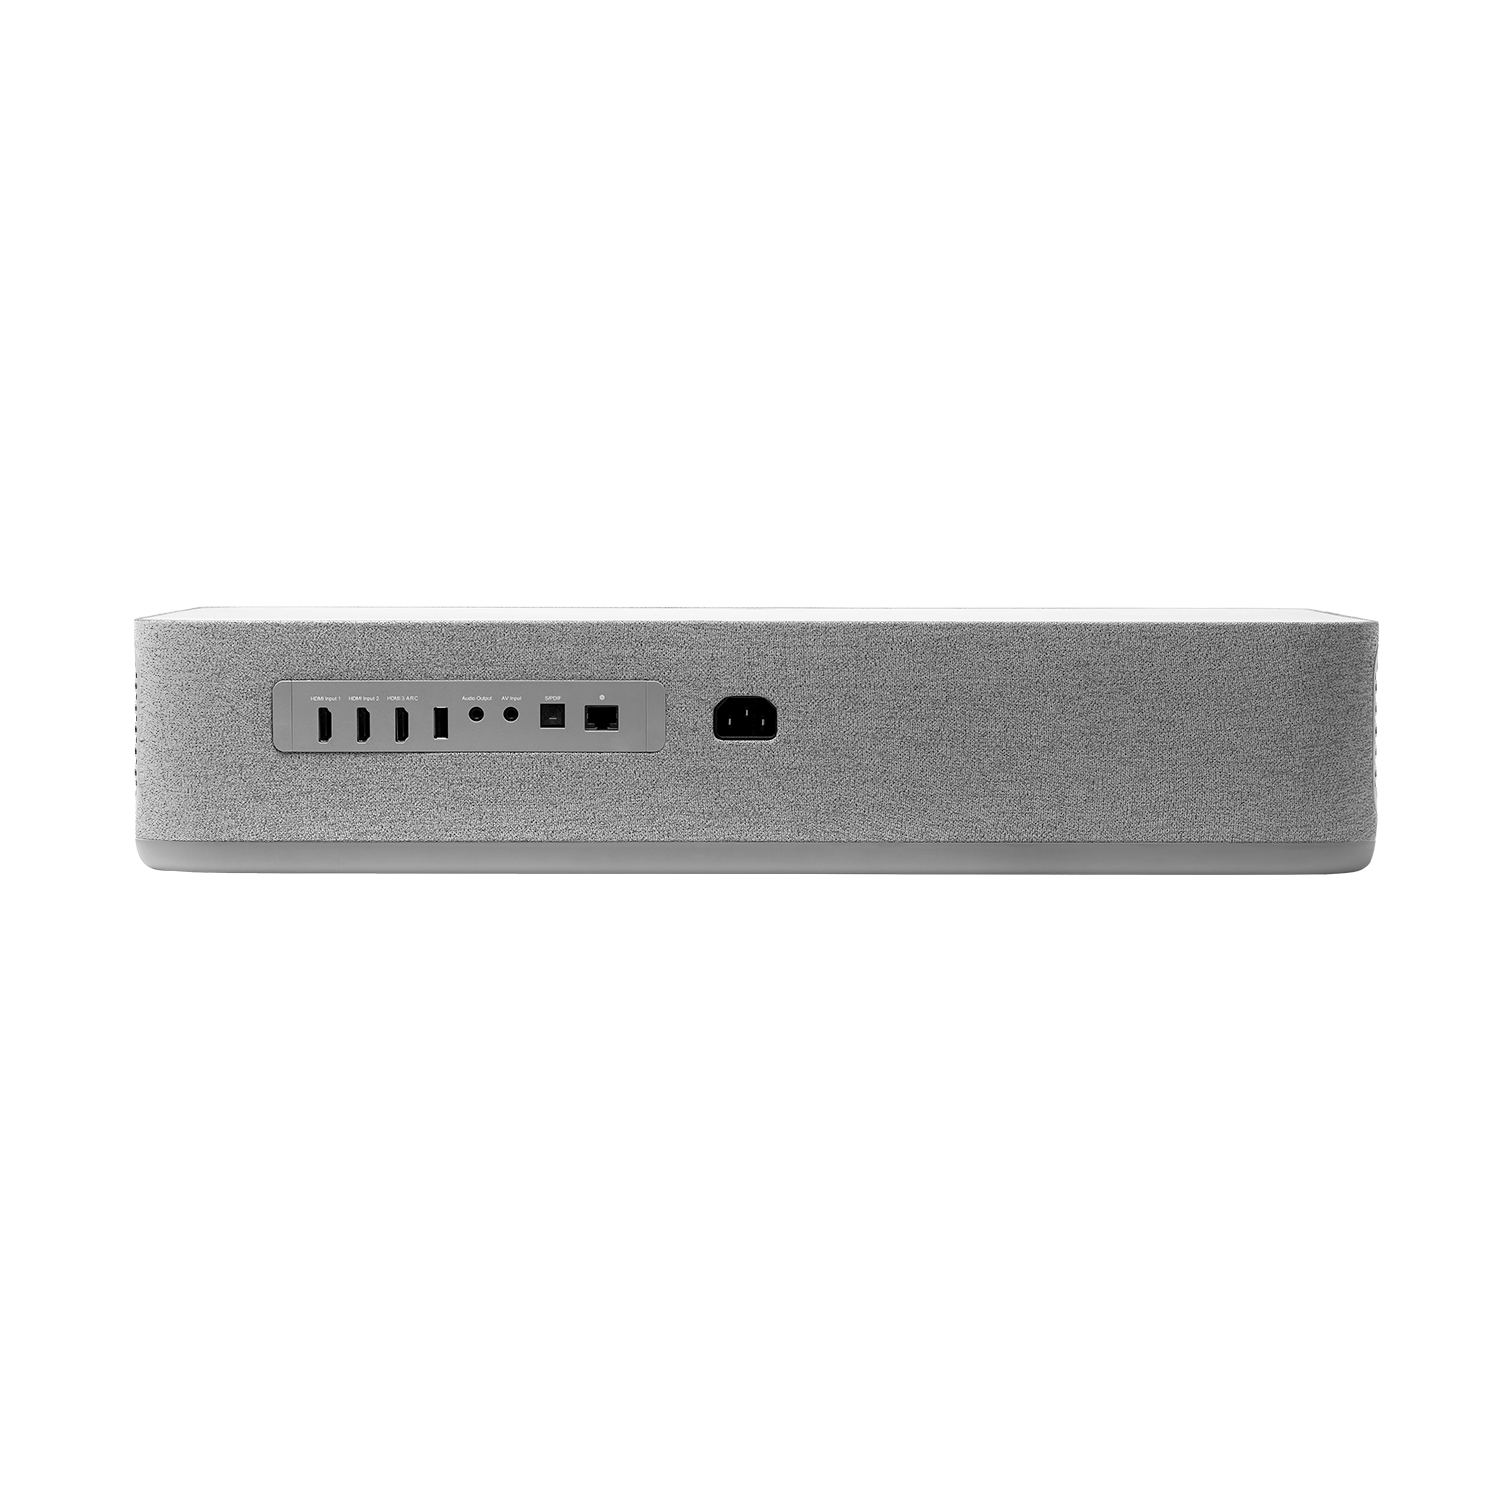 The back of the white VAVA 4K Laser TV, showing the ports.